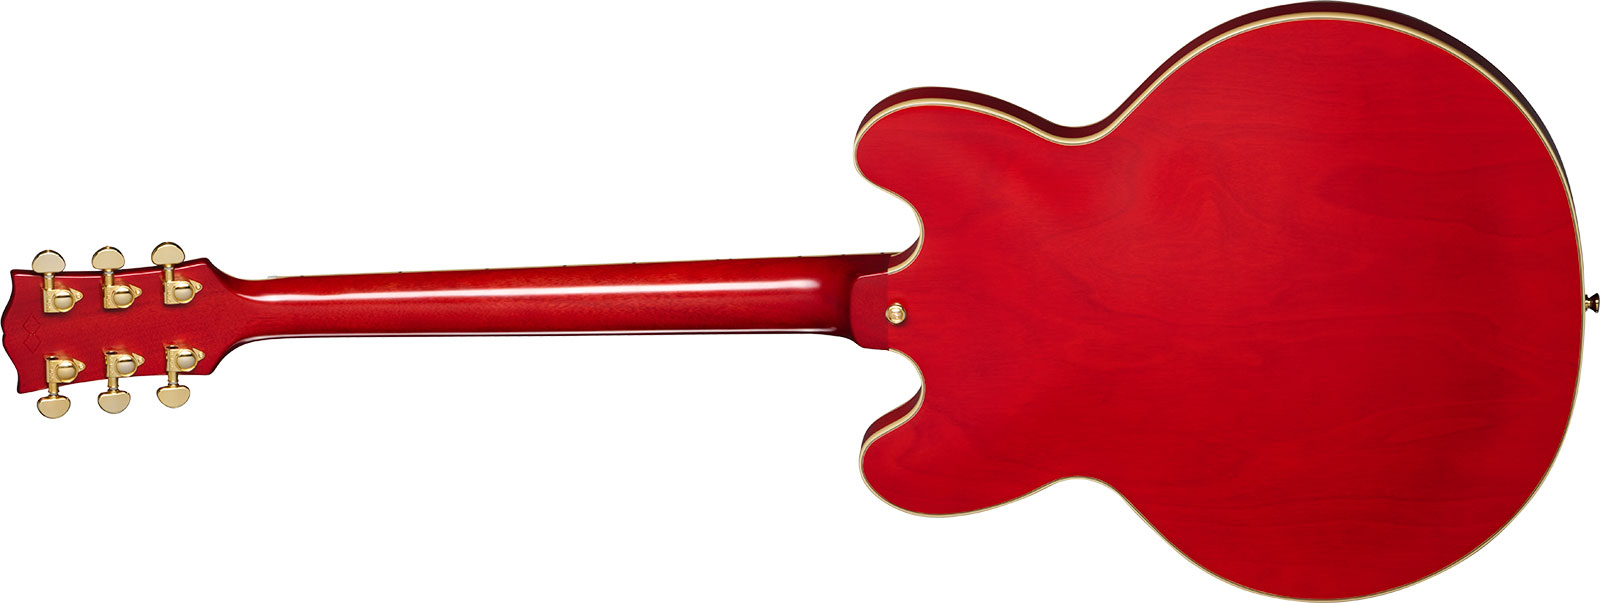 Epiphone Es355 1959 Inspired By 2h Gibson Ht Eb - Vos Cherry Red - Guitare Électrique 1/2 Caisse - Variation 1